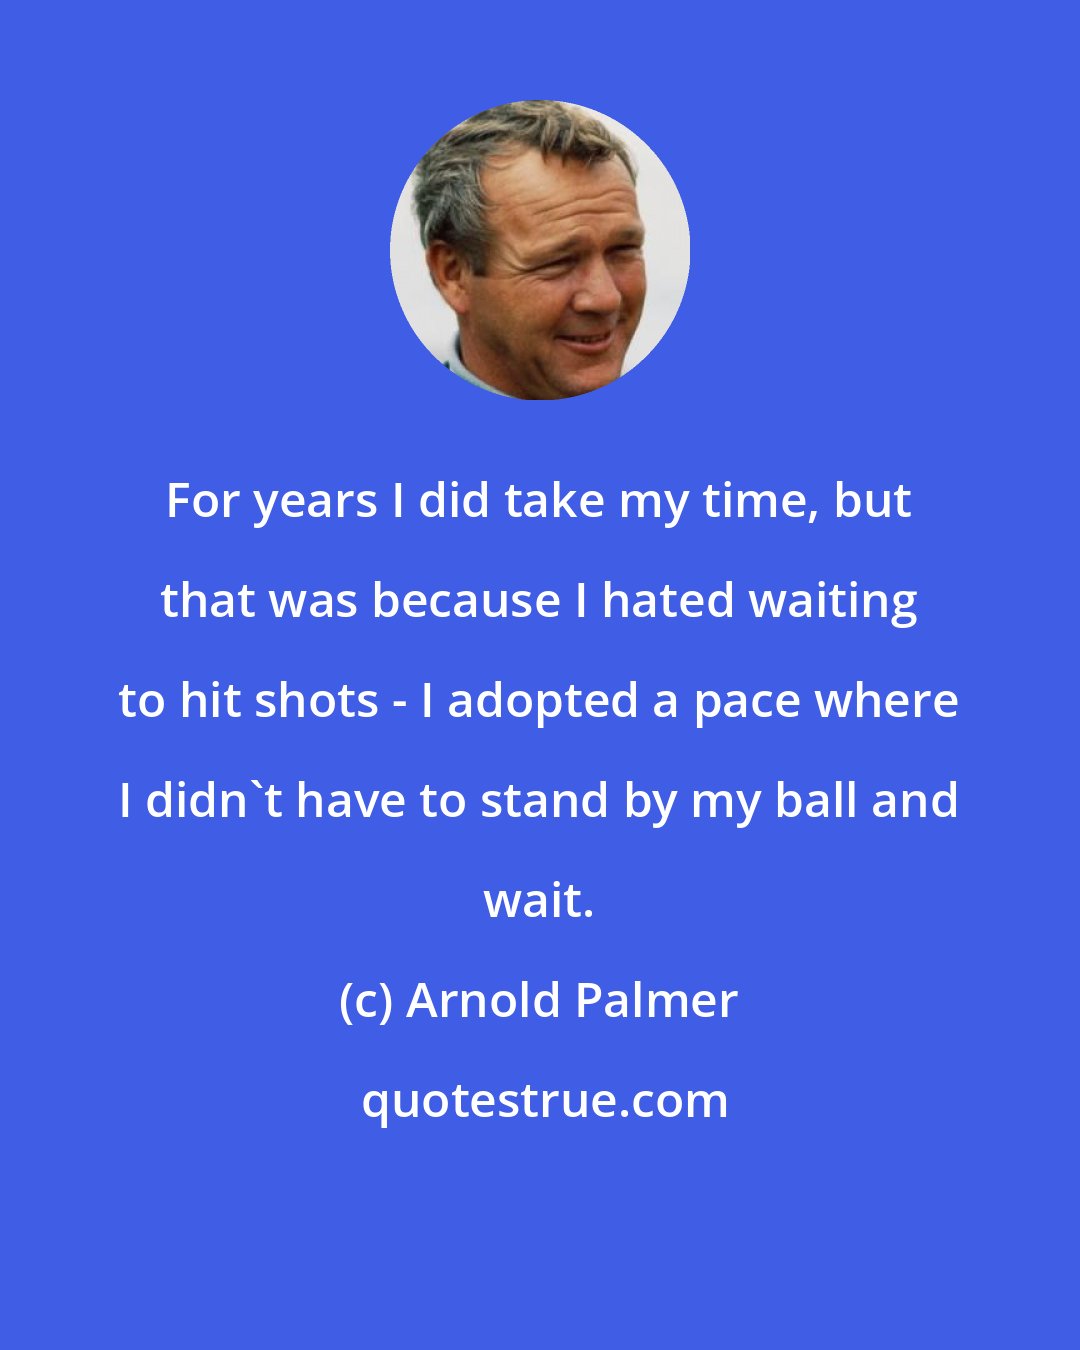 Arnold Palmer: For years I did take my time, but that was because I hated waiting to hit shots - I adopted a pace where I didn't have to stand by my ball and wait.